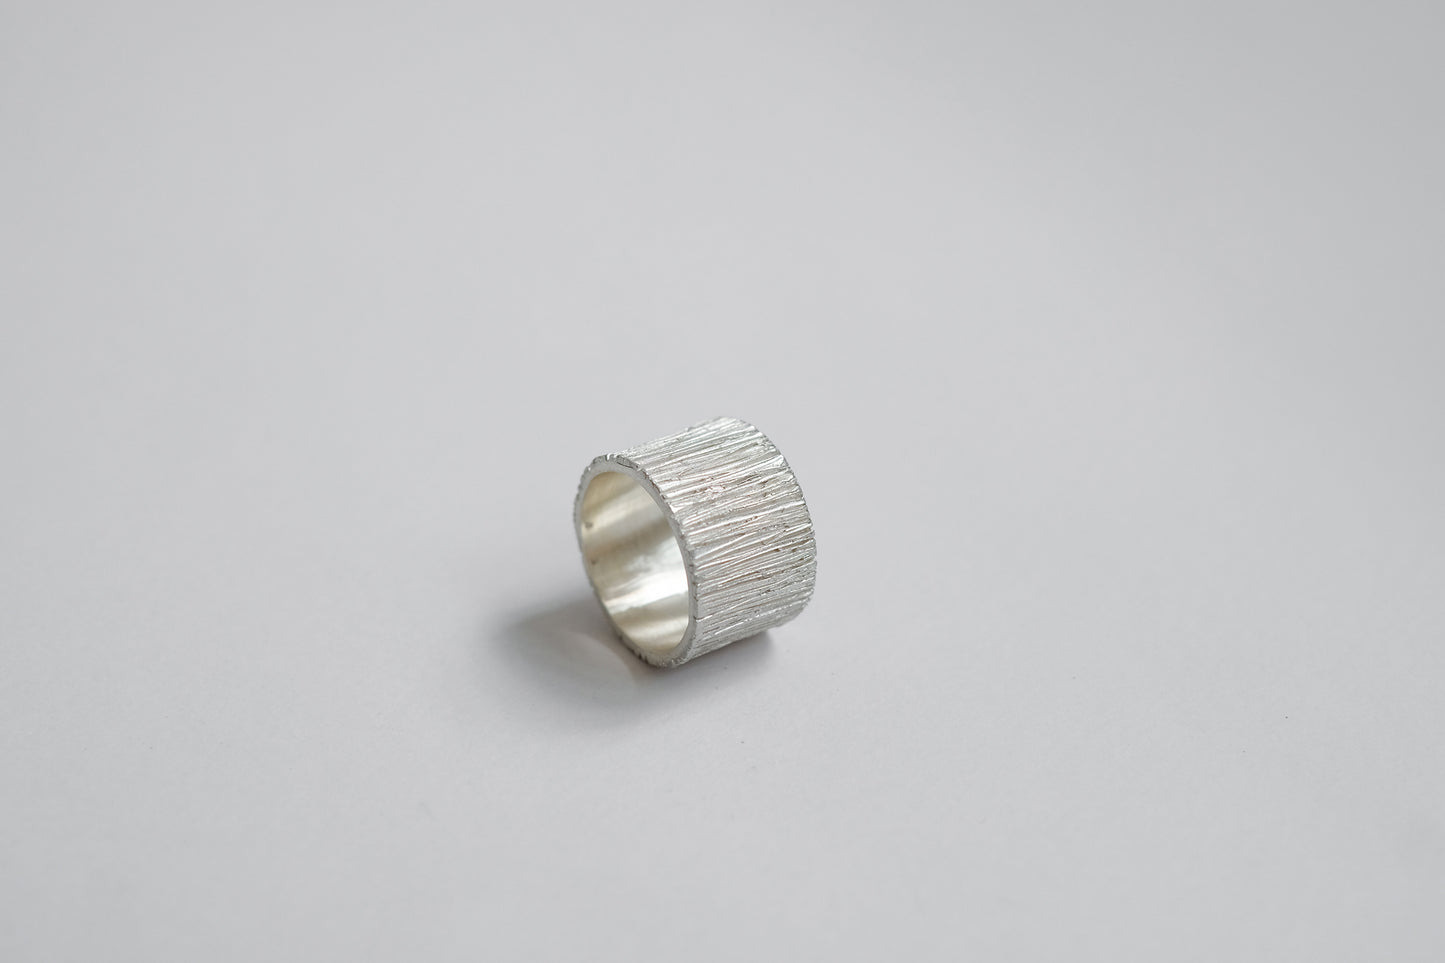 Linear Ring